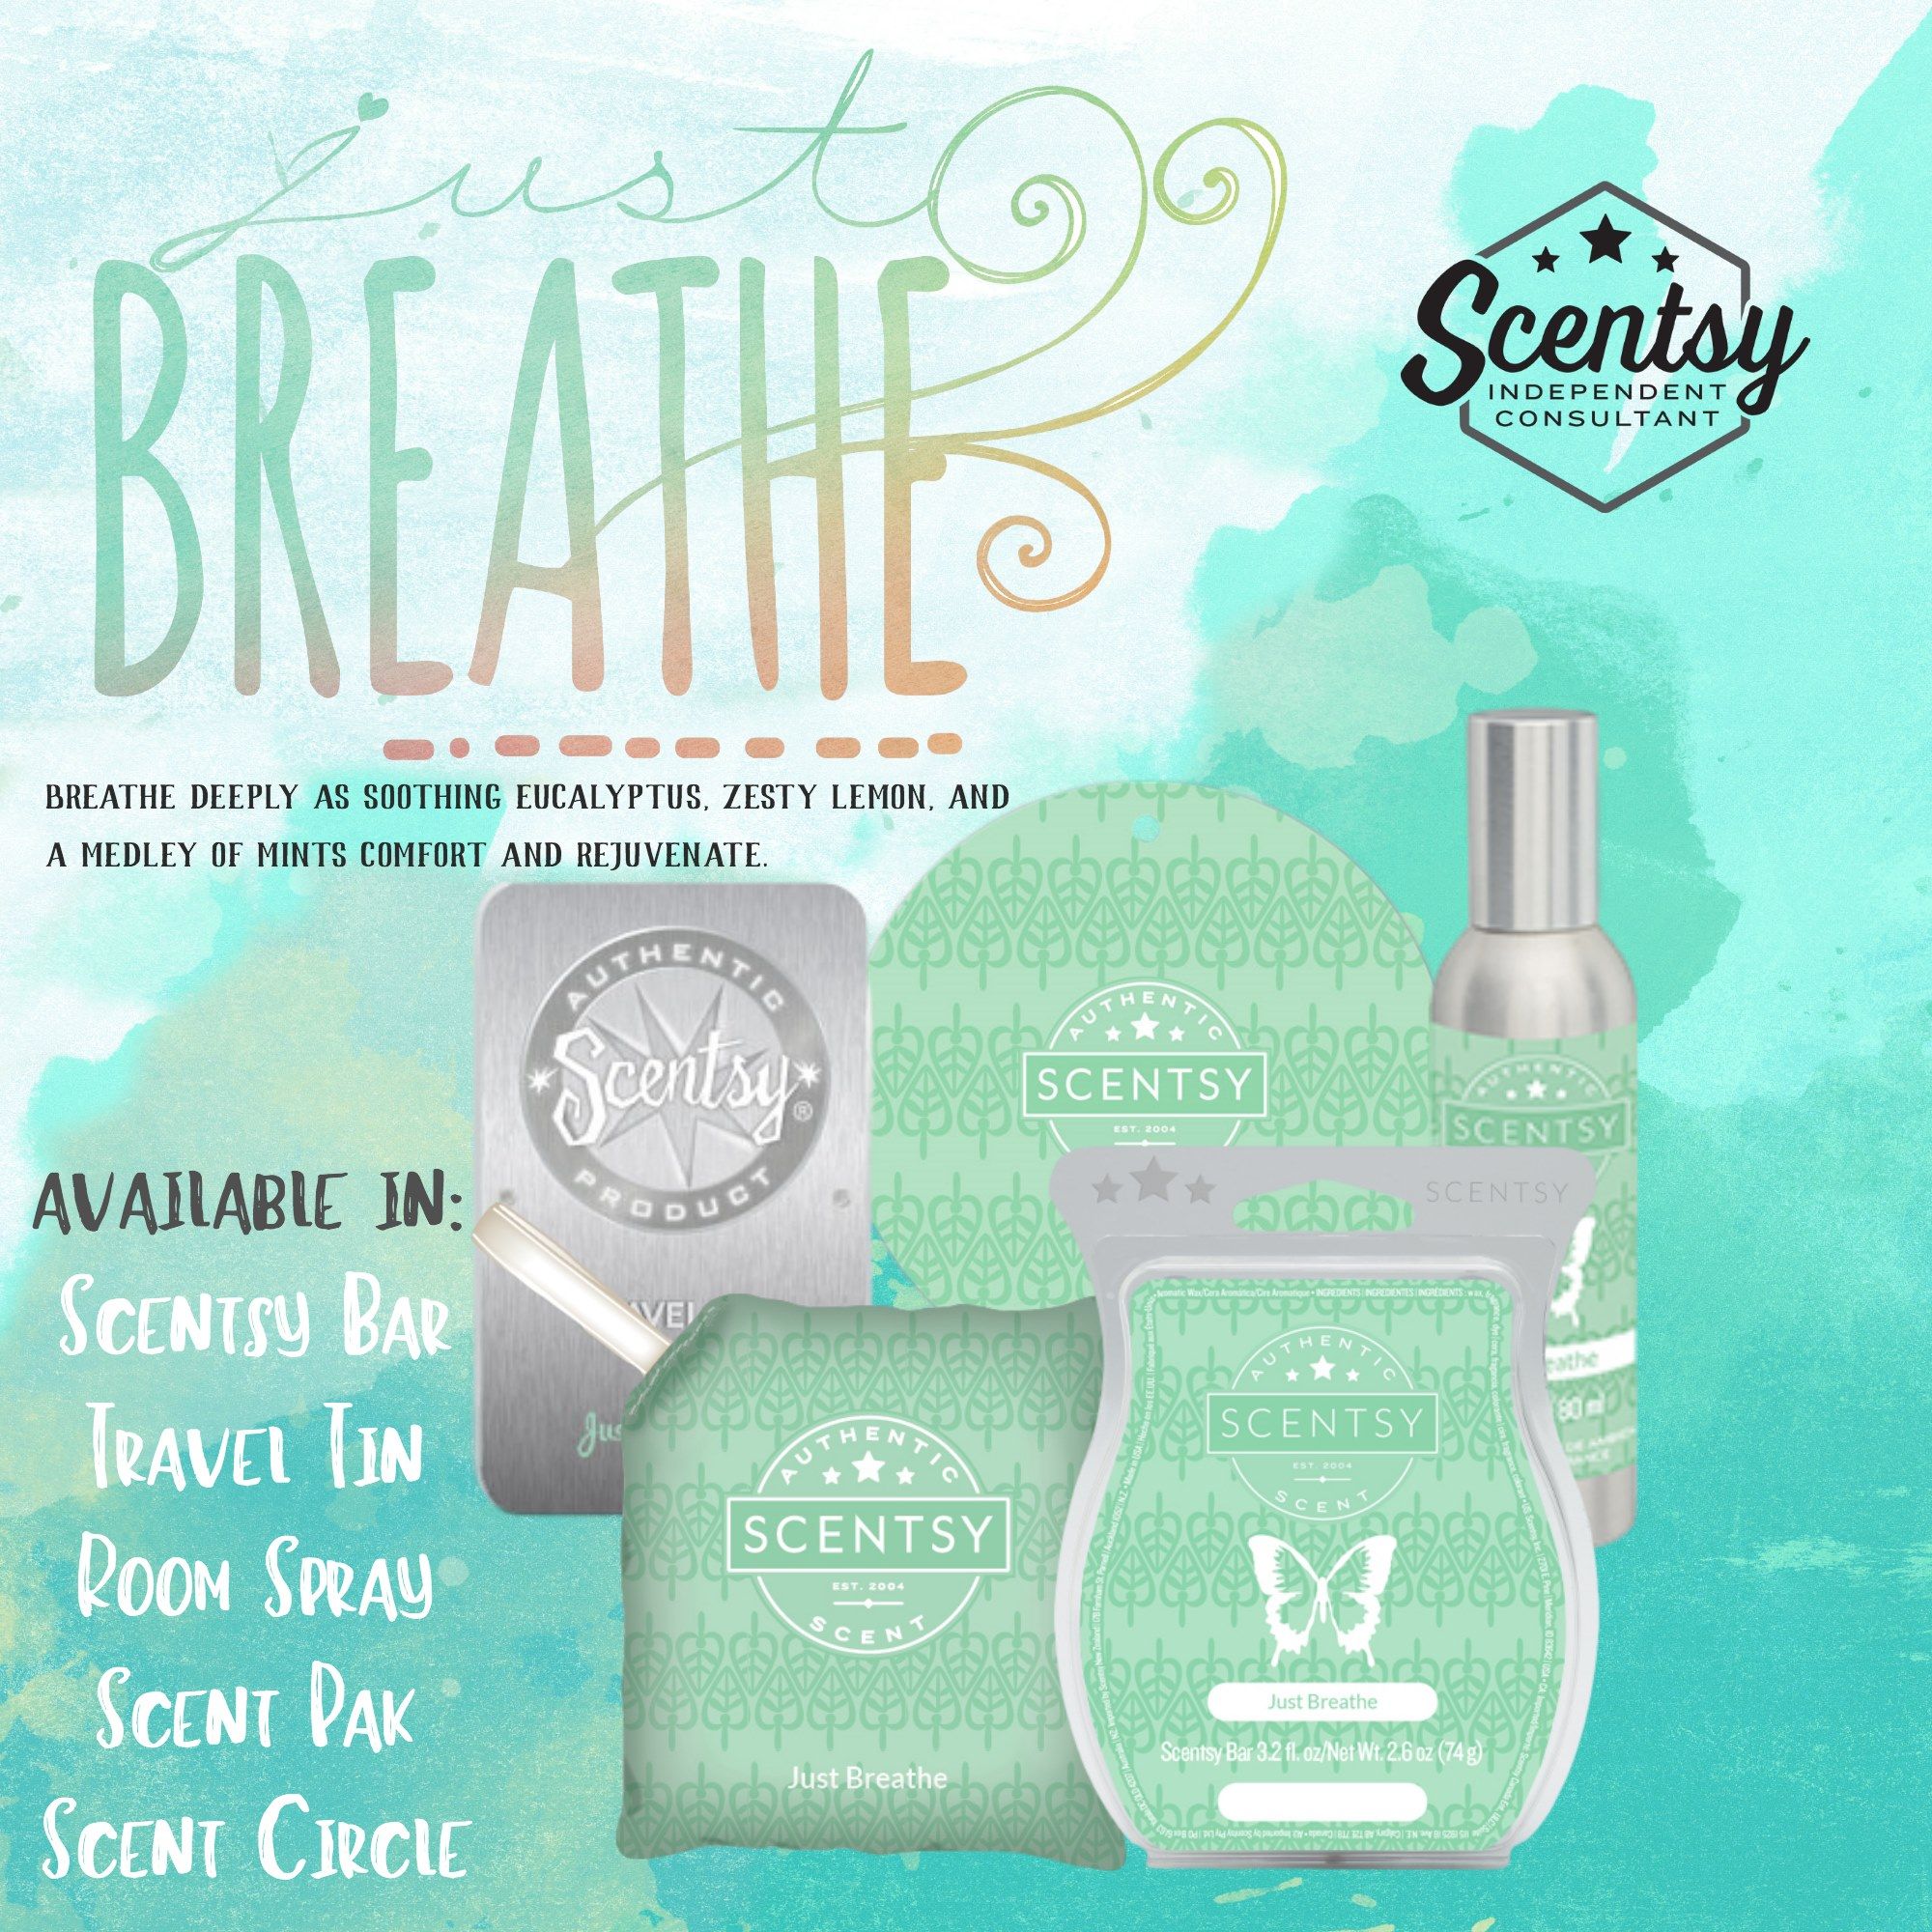 just breathe scentsy bar review